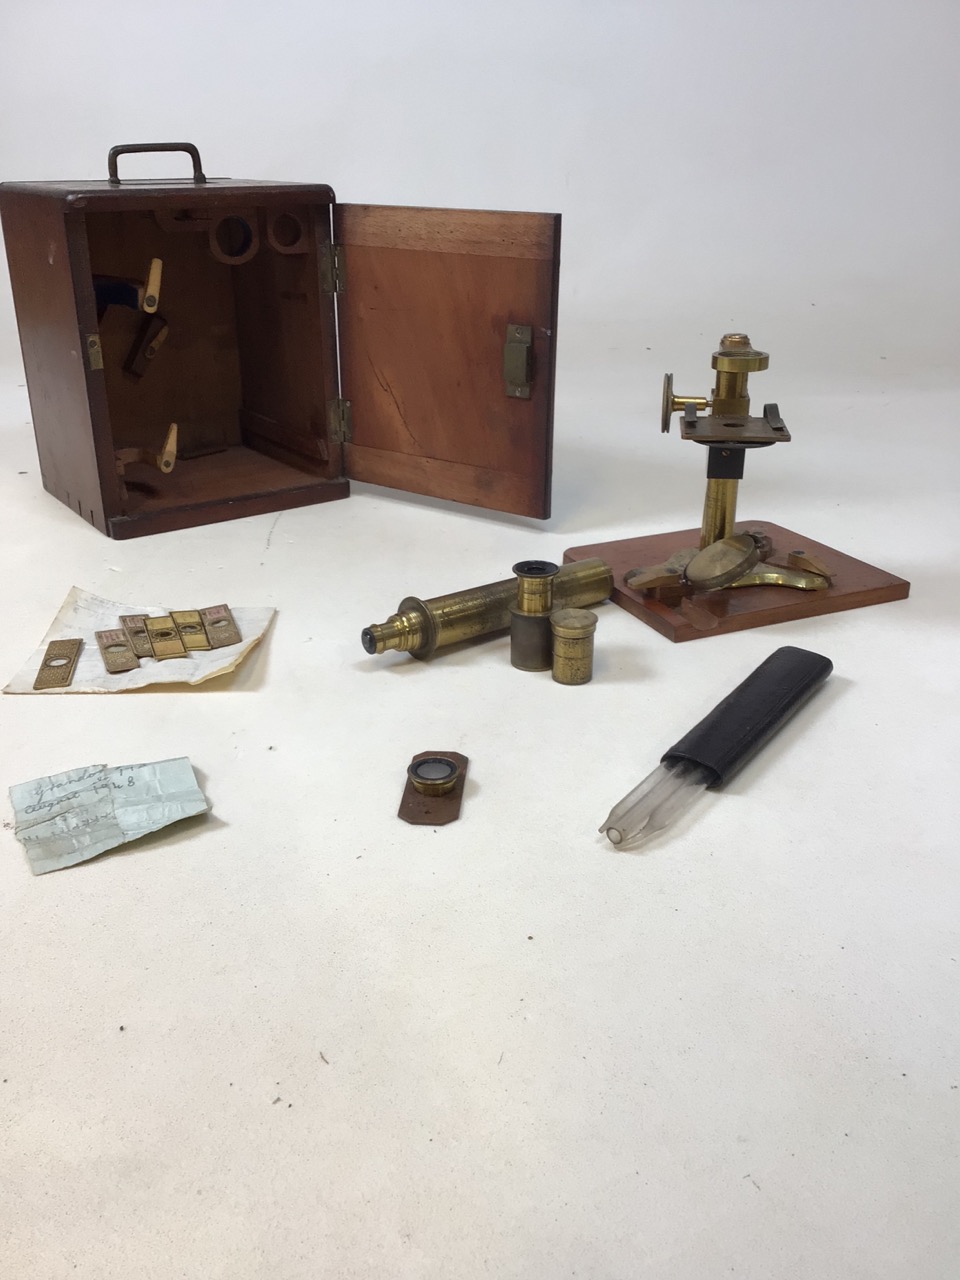 A brass microscope by Negretti & Zambra in original mahogany case with lenses and slides W:18cm x - Image 2 of 7